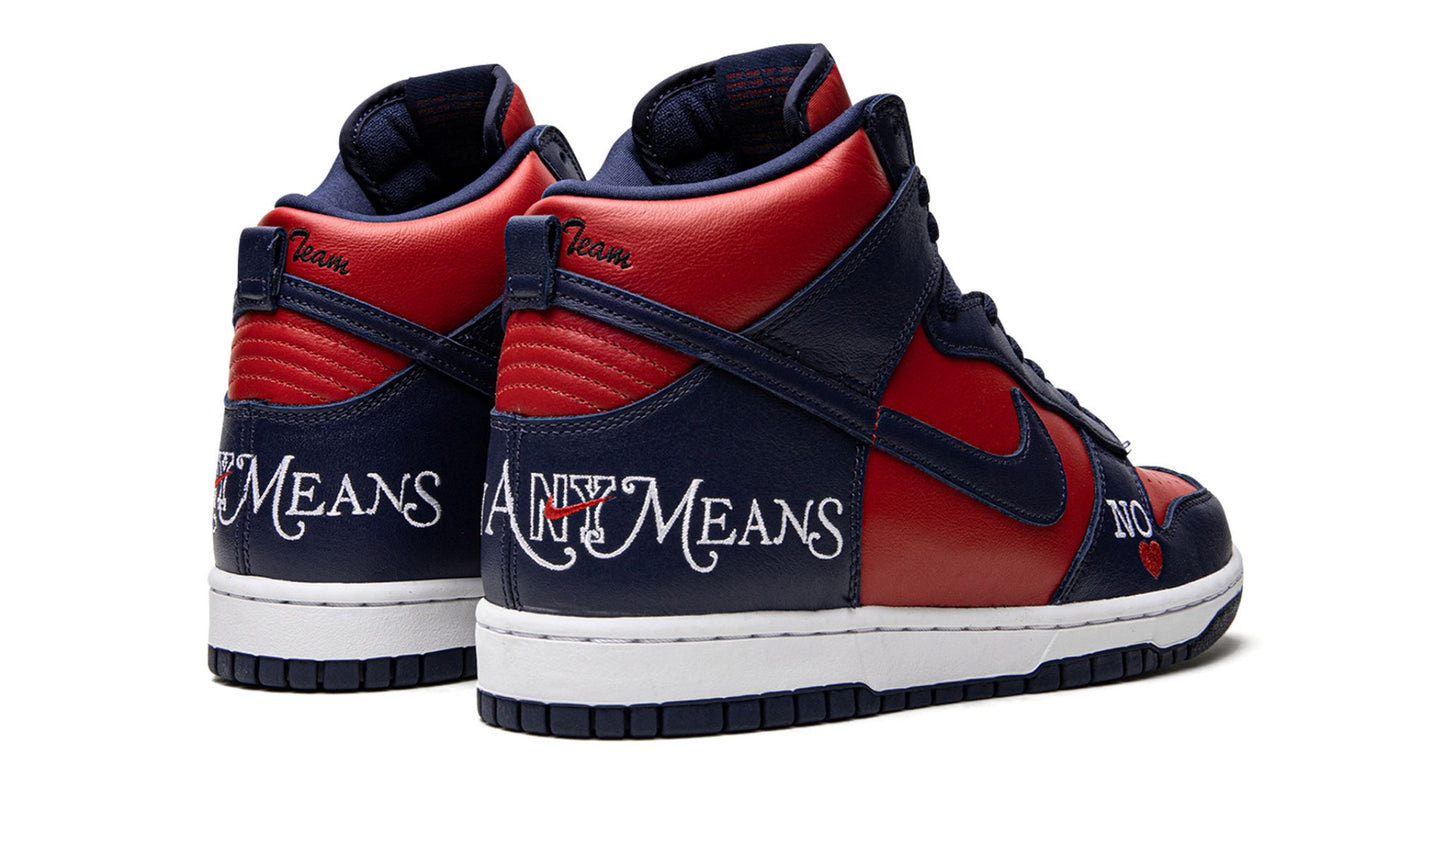 Nike SB Dunk High Supreme By Any Means Red Navy